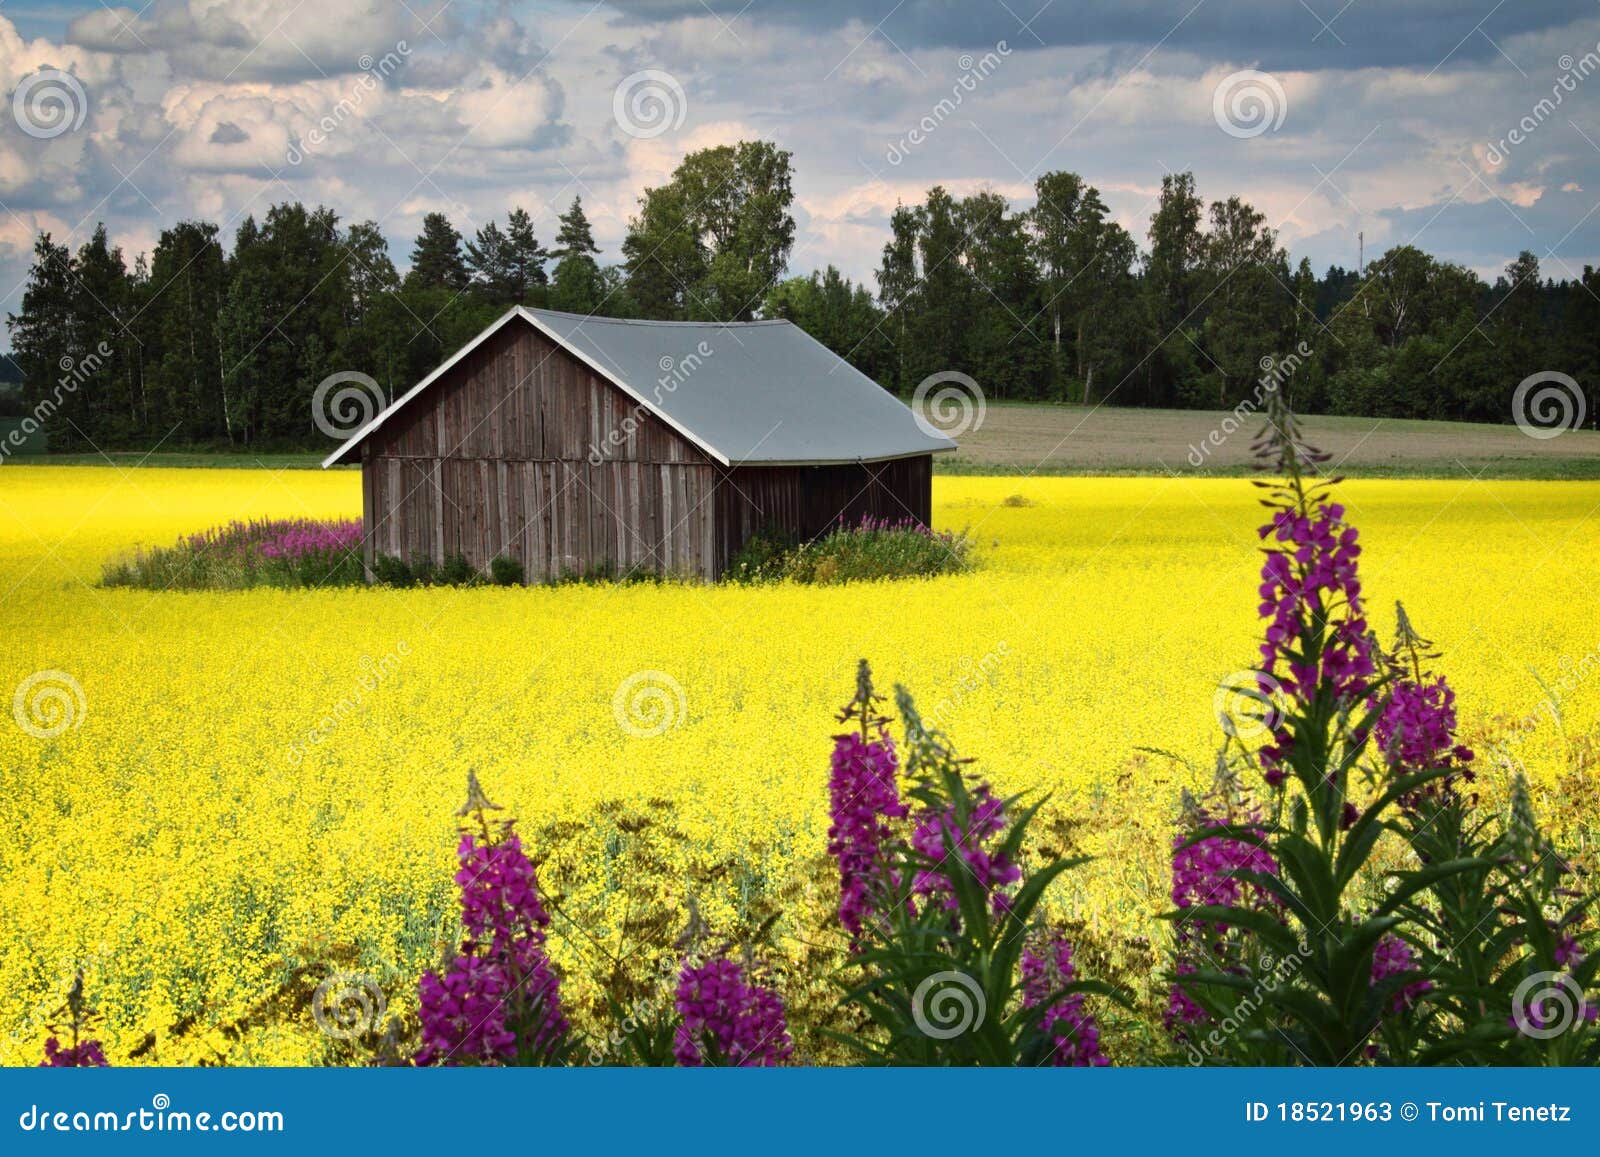 finland: bright colors of summer